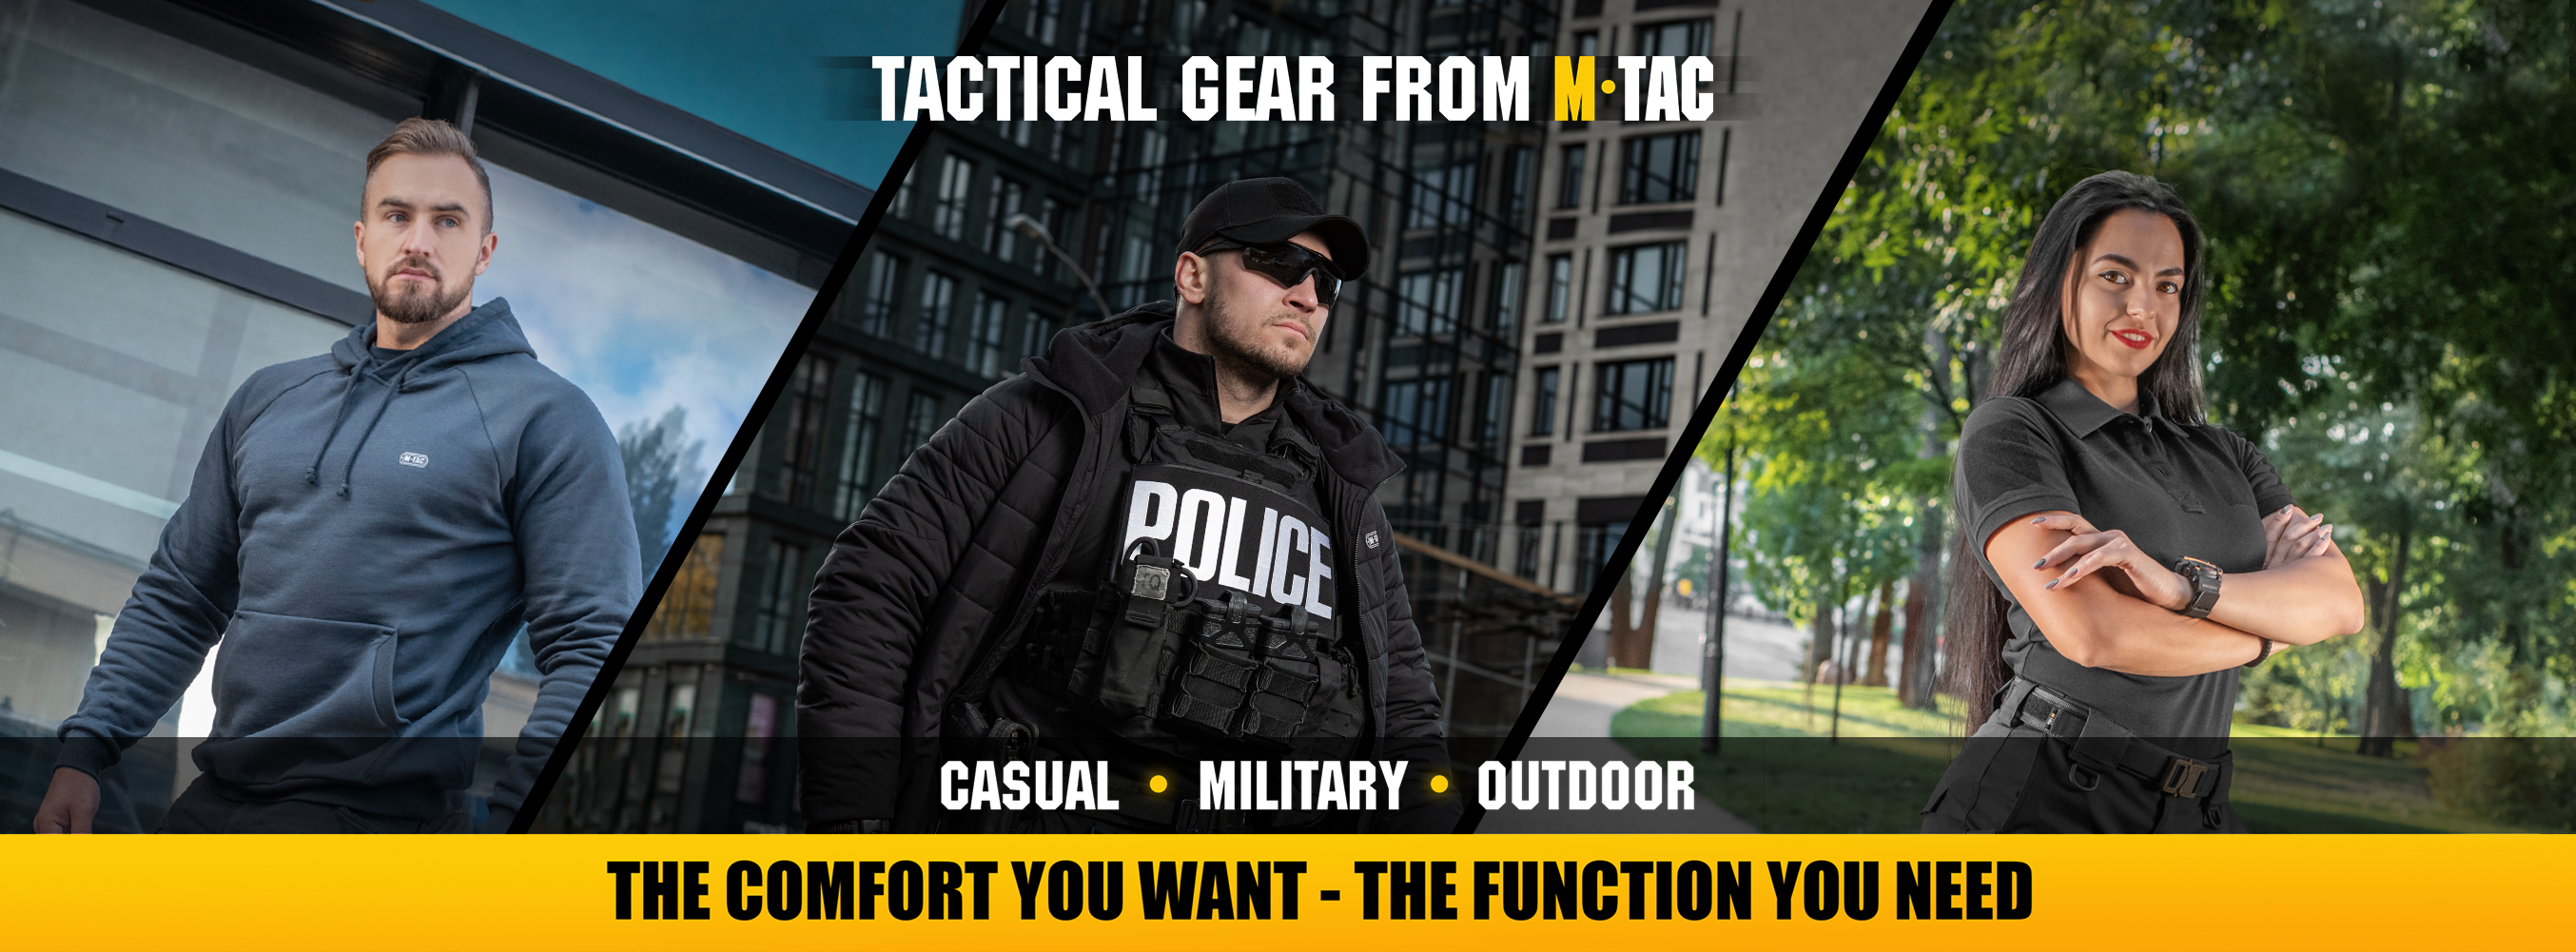 Catalog of 5.11 Tactical® products in Ukraine prices 2023 - buy in the  brand online store